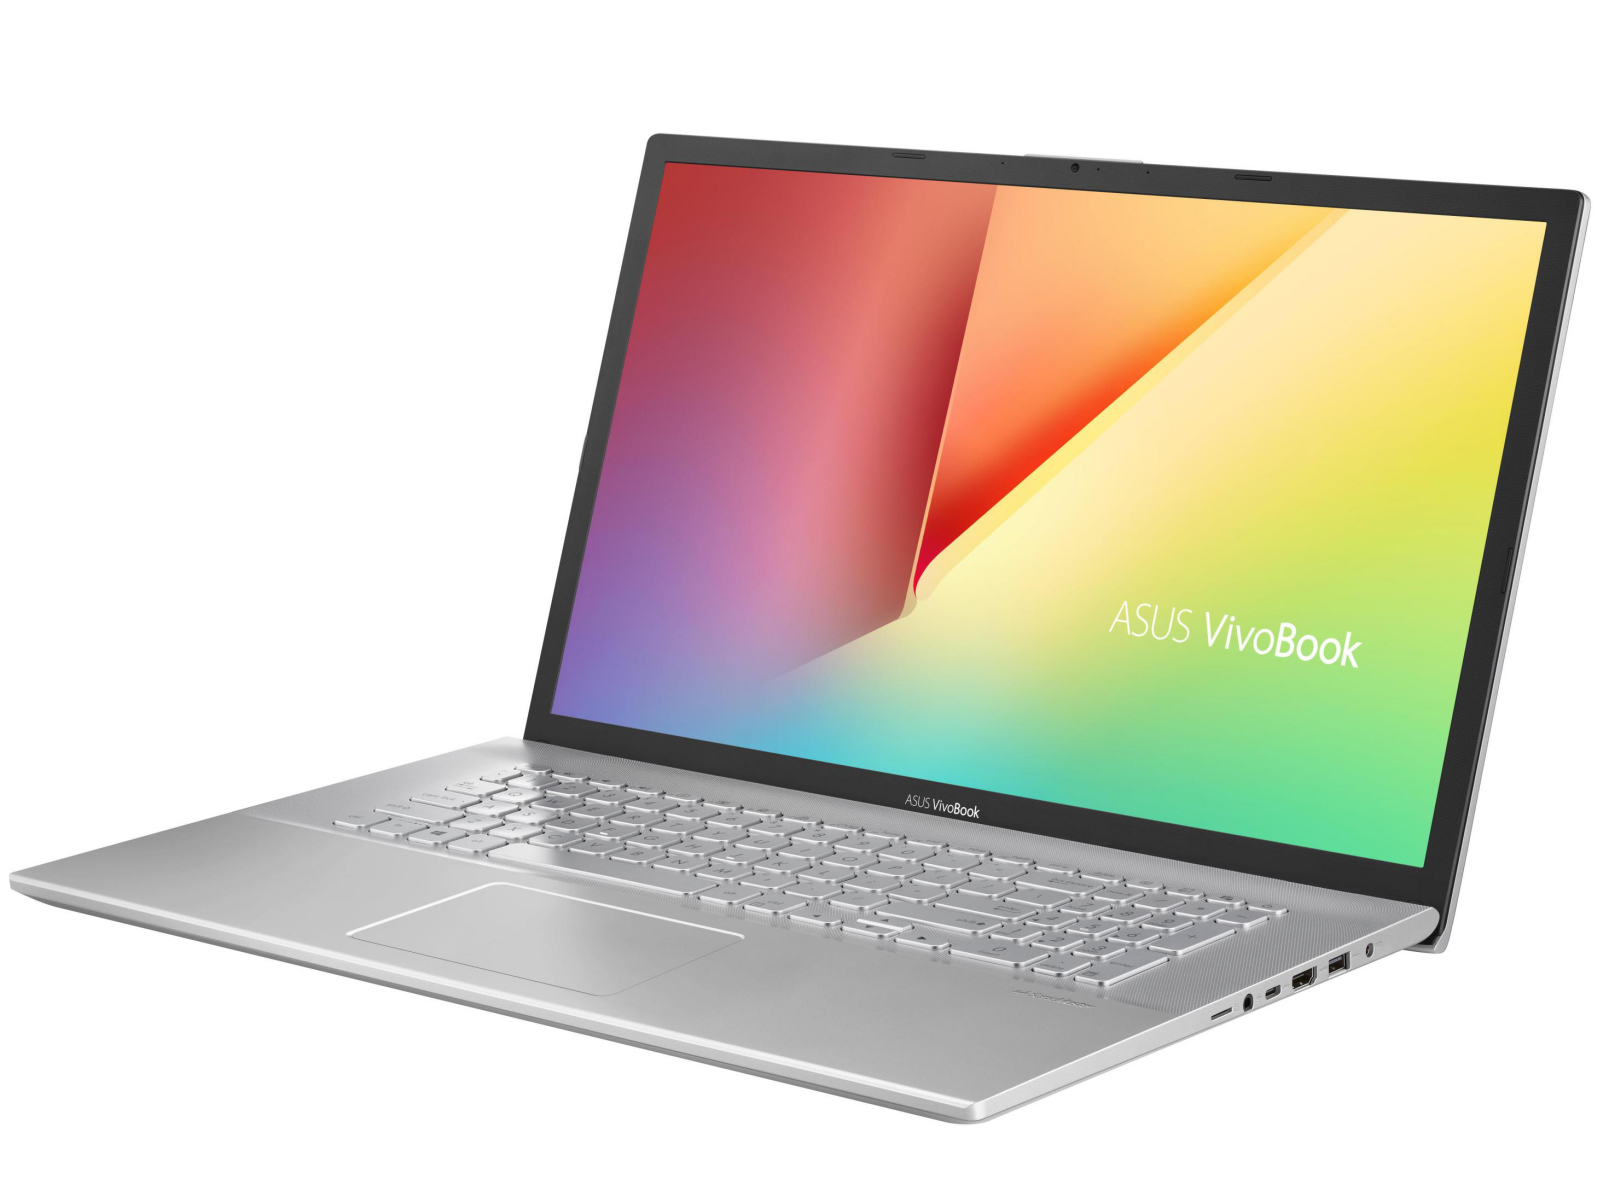 Asus VivoBook 17 F712FA Review: Lackluster 17.3-inch laptop for 